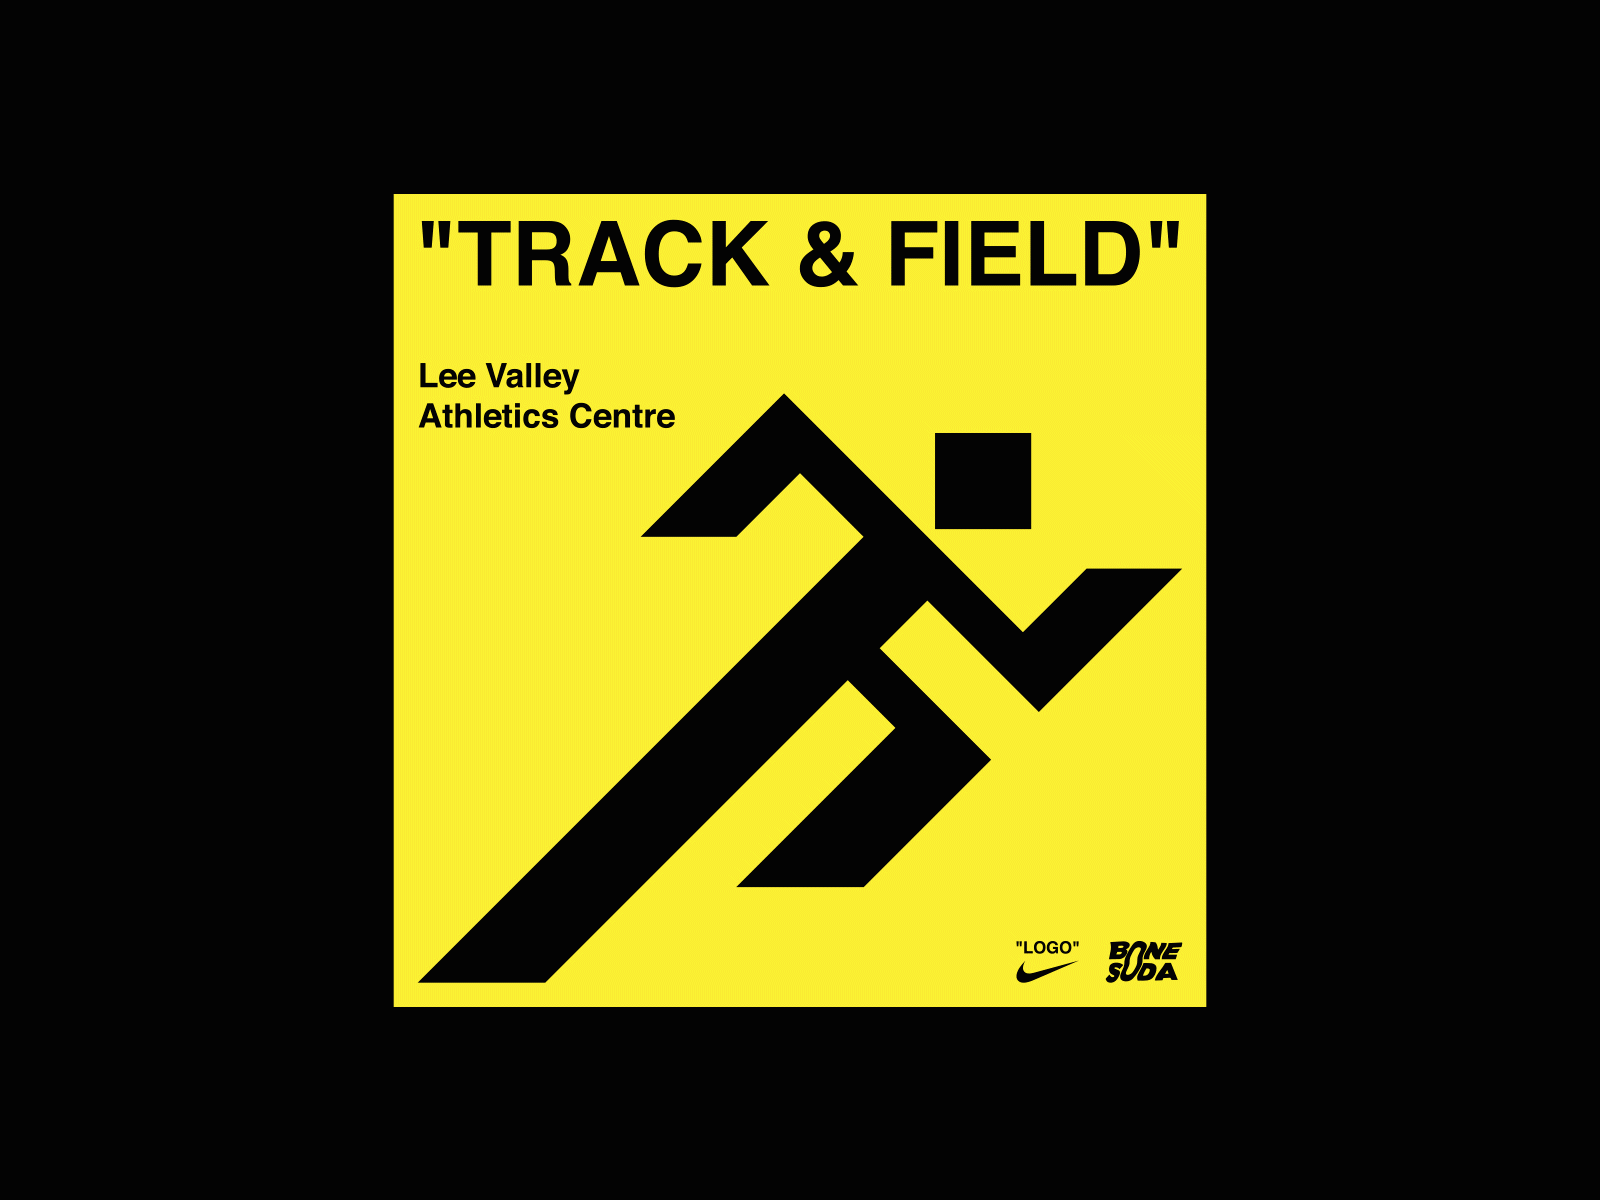 Nike Track designs, themes, templates and downloadable graphic elements